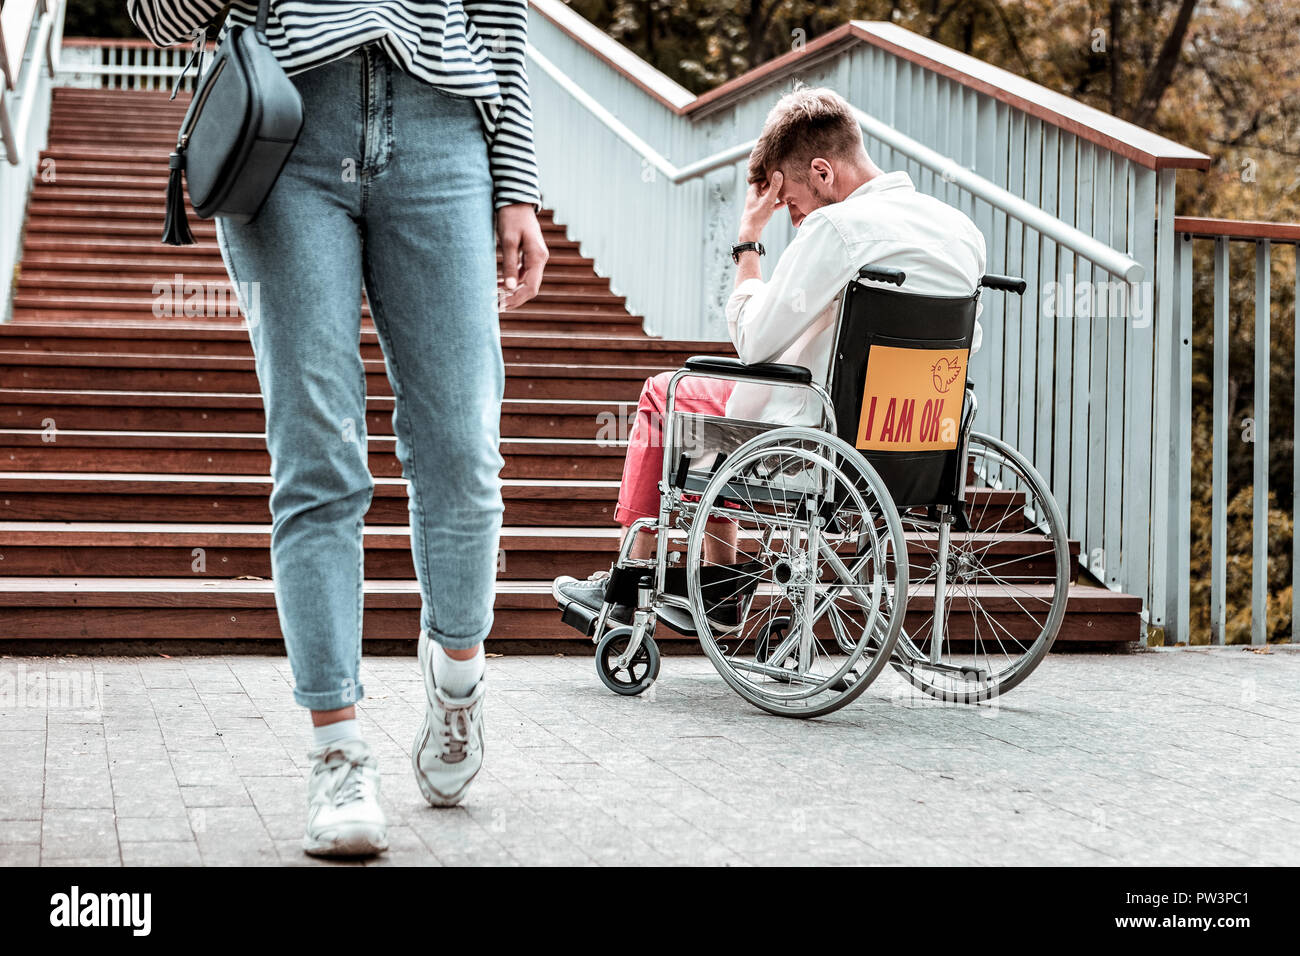 Young woman passing disabled man and not helping him Stock Photo